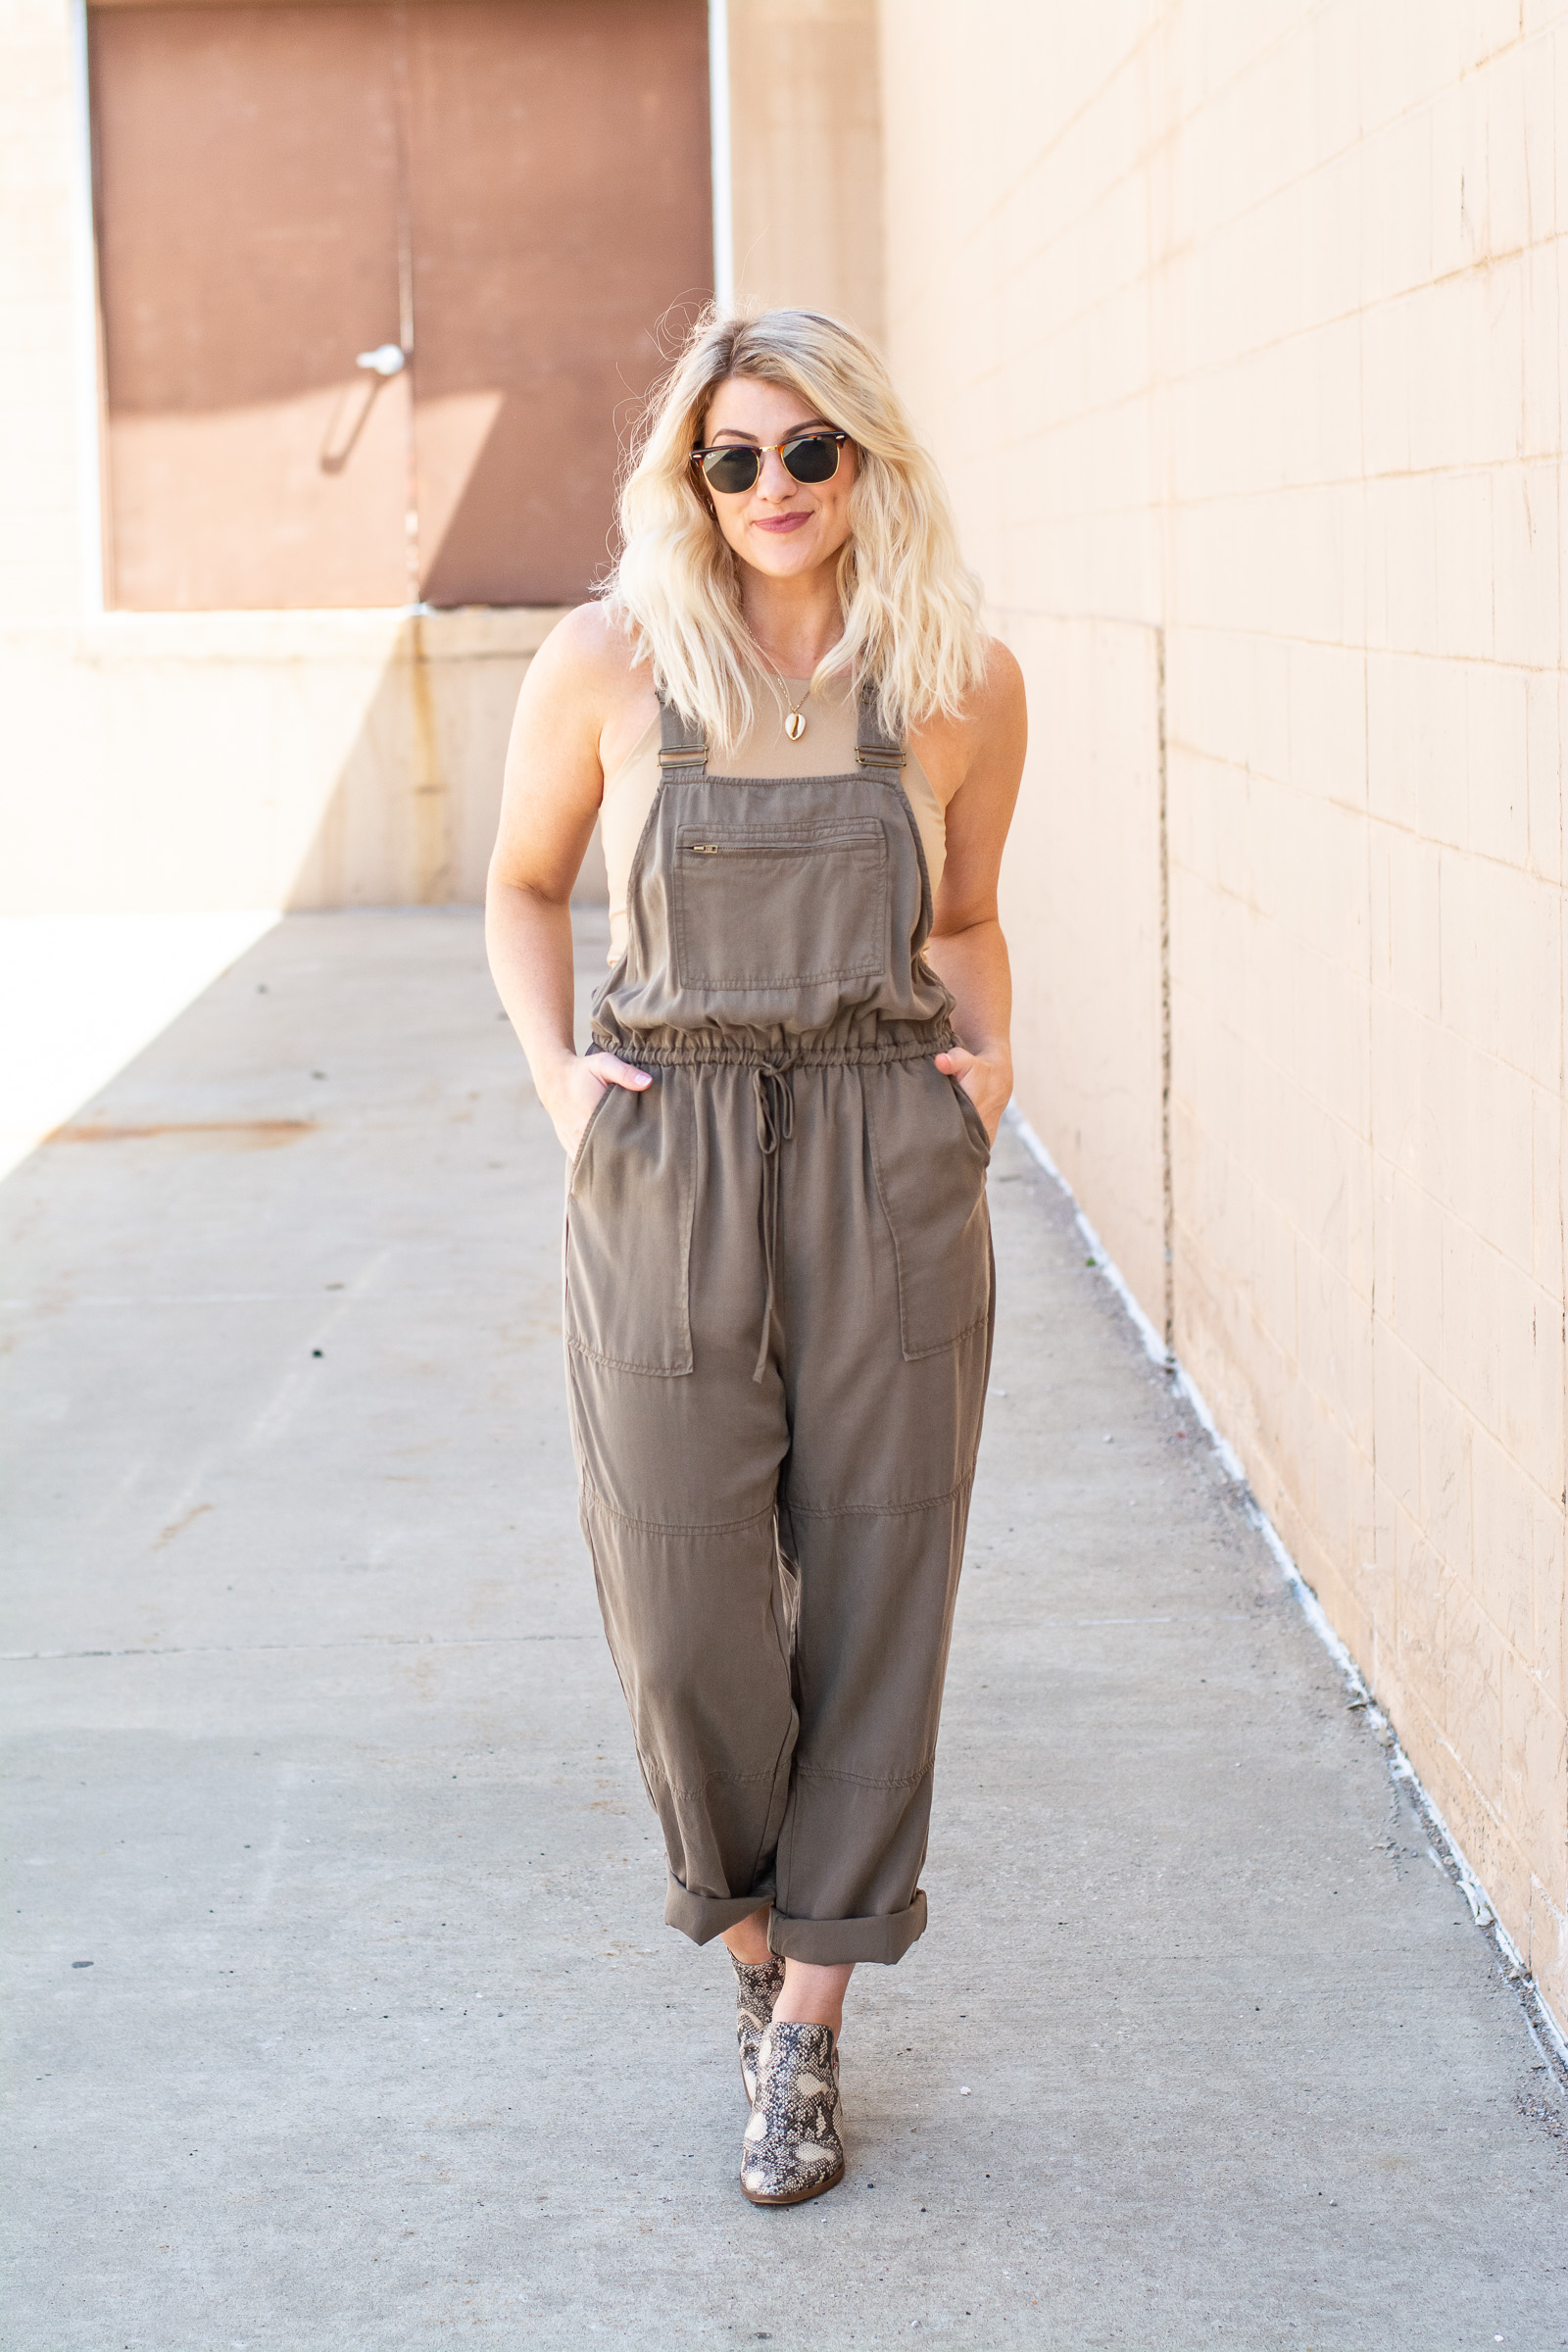 Olive Overalls + Snakeskin Booties. | Ash from LSR